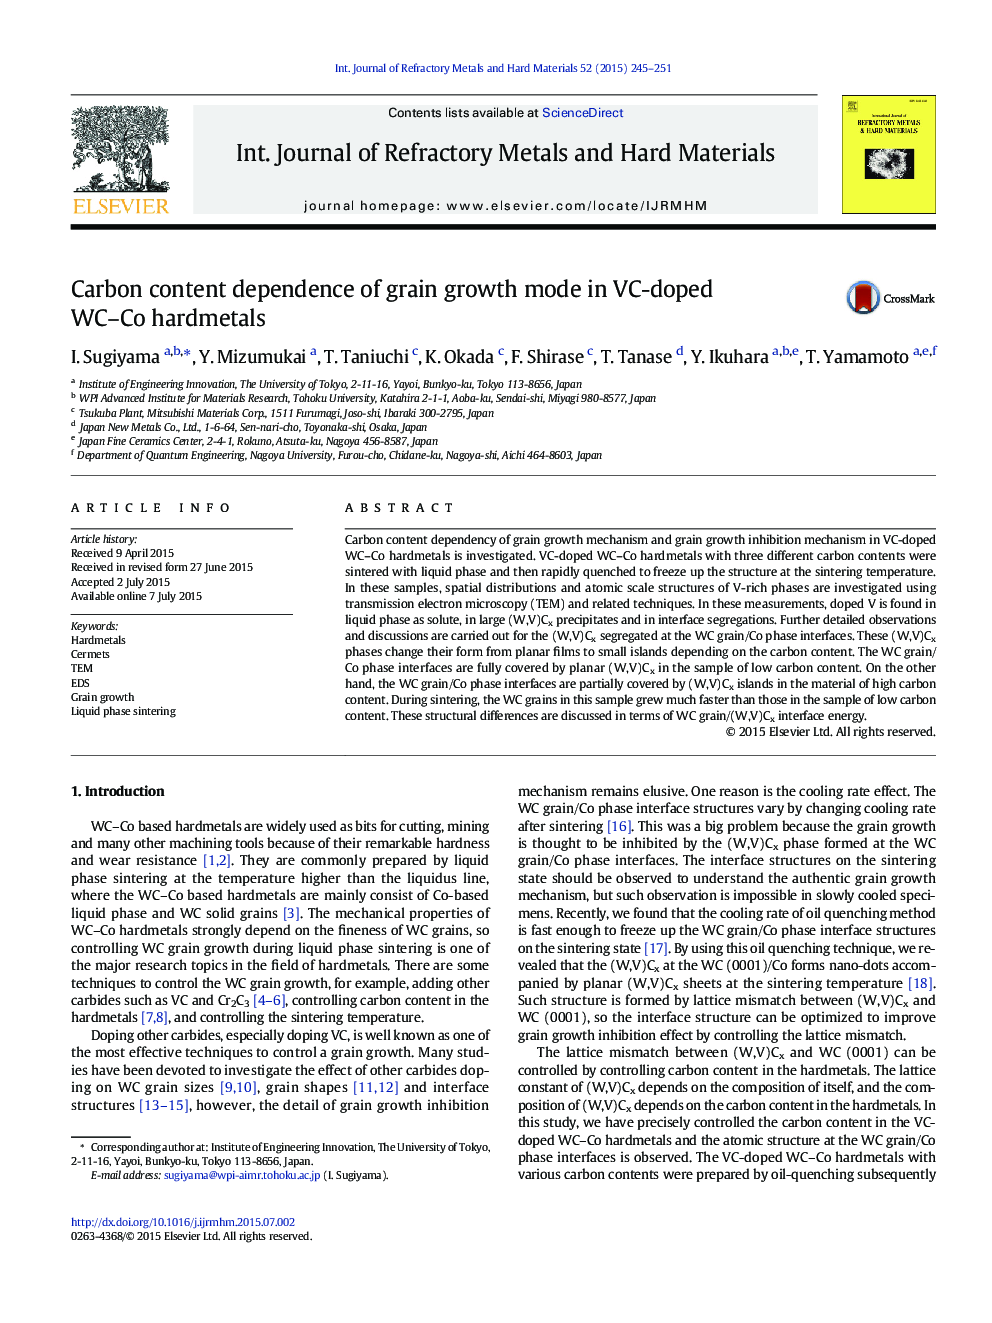 Carbon content dependence of grain growth mode in VC-doped WC–Co hardmetals